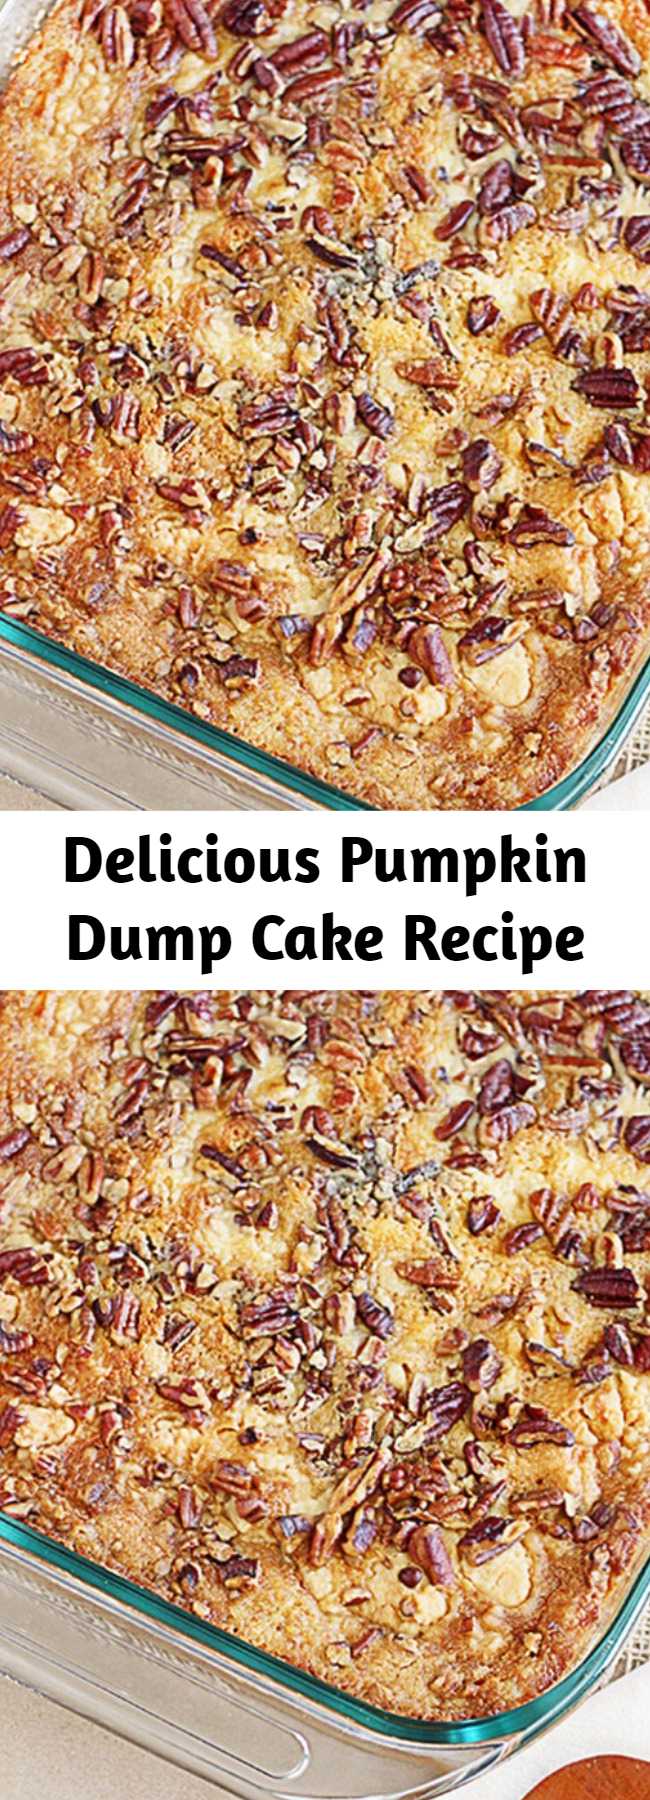 Delicious Pumpkin Dump Cake Recipe - This recipe is a sure fire win for all of you pumpkin lovers!  Yellow cake mix, pumpkin, butter and pecans are the ingredients that make this Pumpkin Dump Cake a favorite — and ready under an hour! The name is exactly how the recipe comes together — by ‘dumping’ the ingredients into a 13×9 cake pan.  After baking, add a dollop of whip cream and enjoy this heavenly delight!